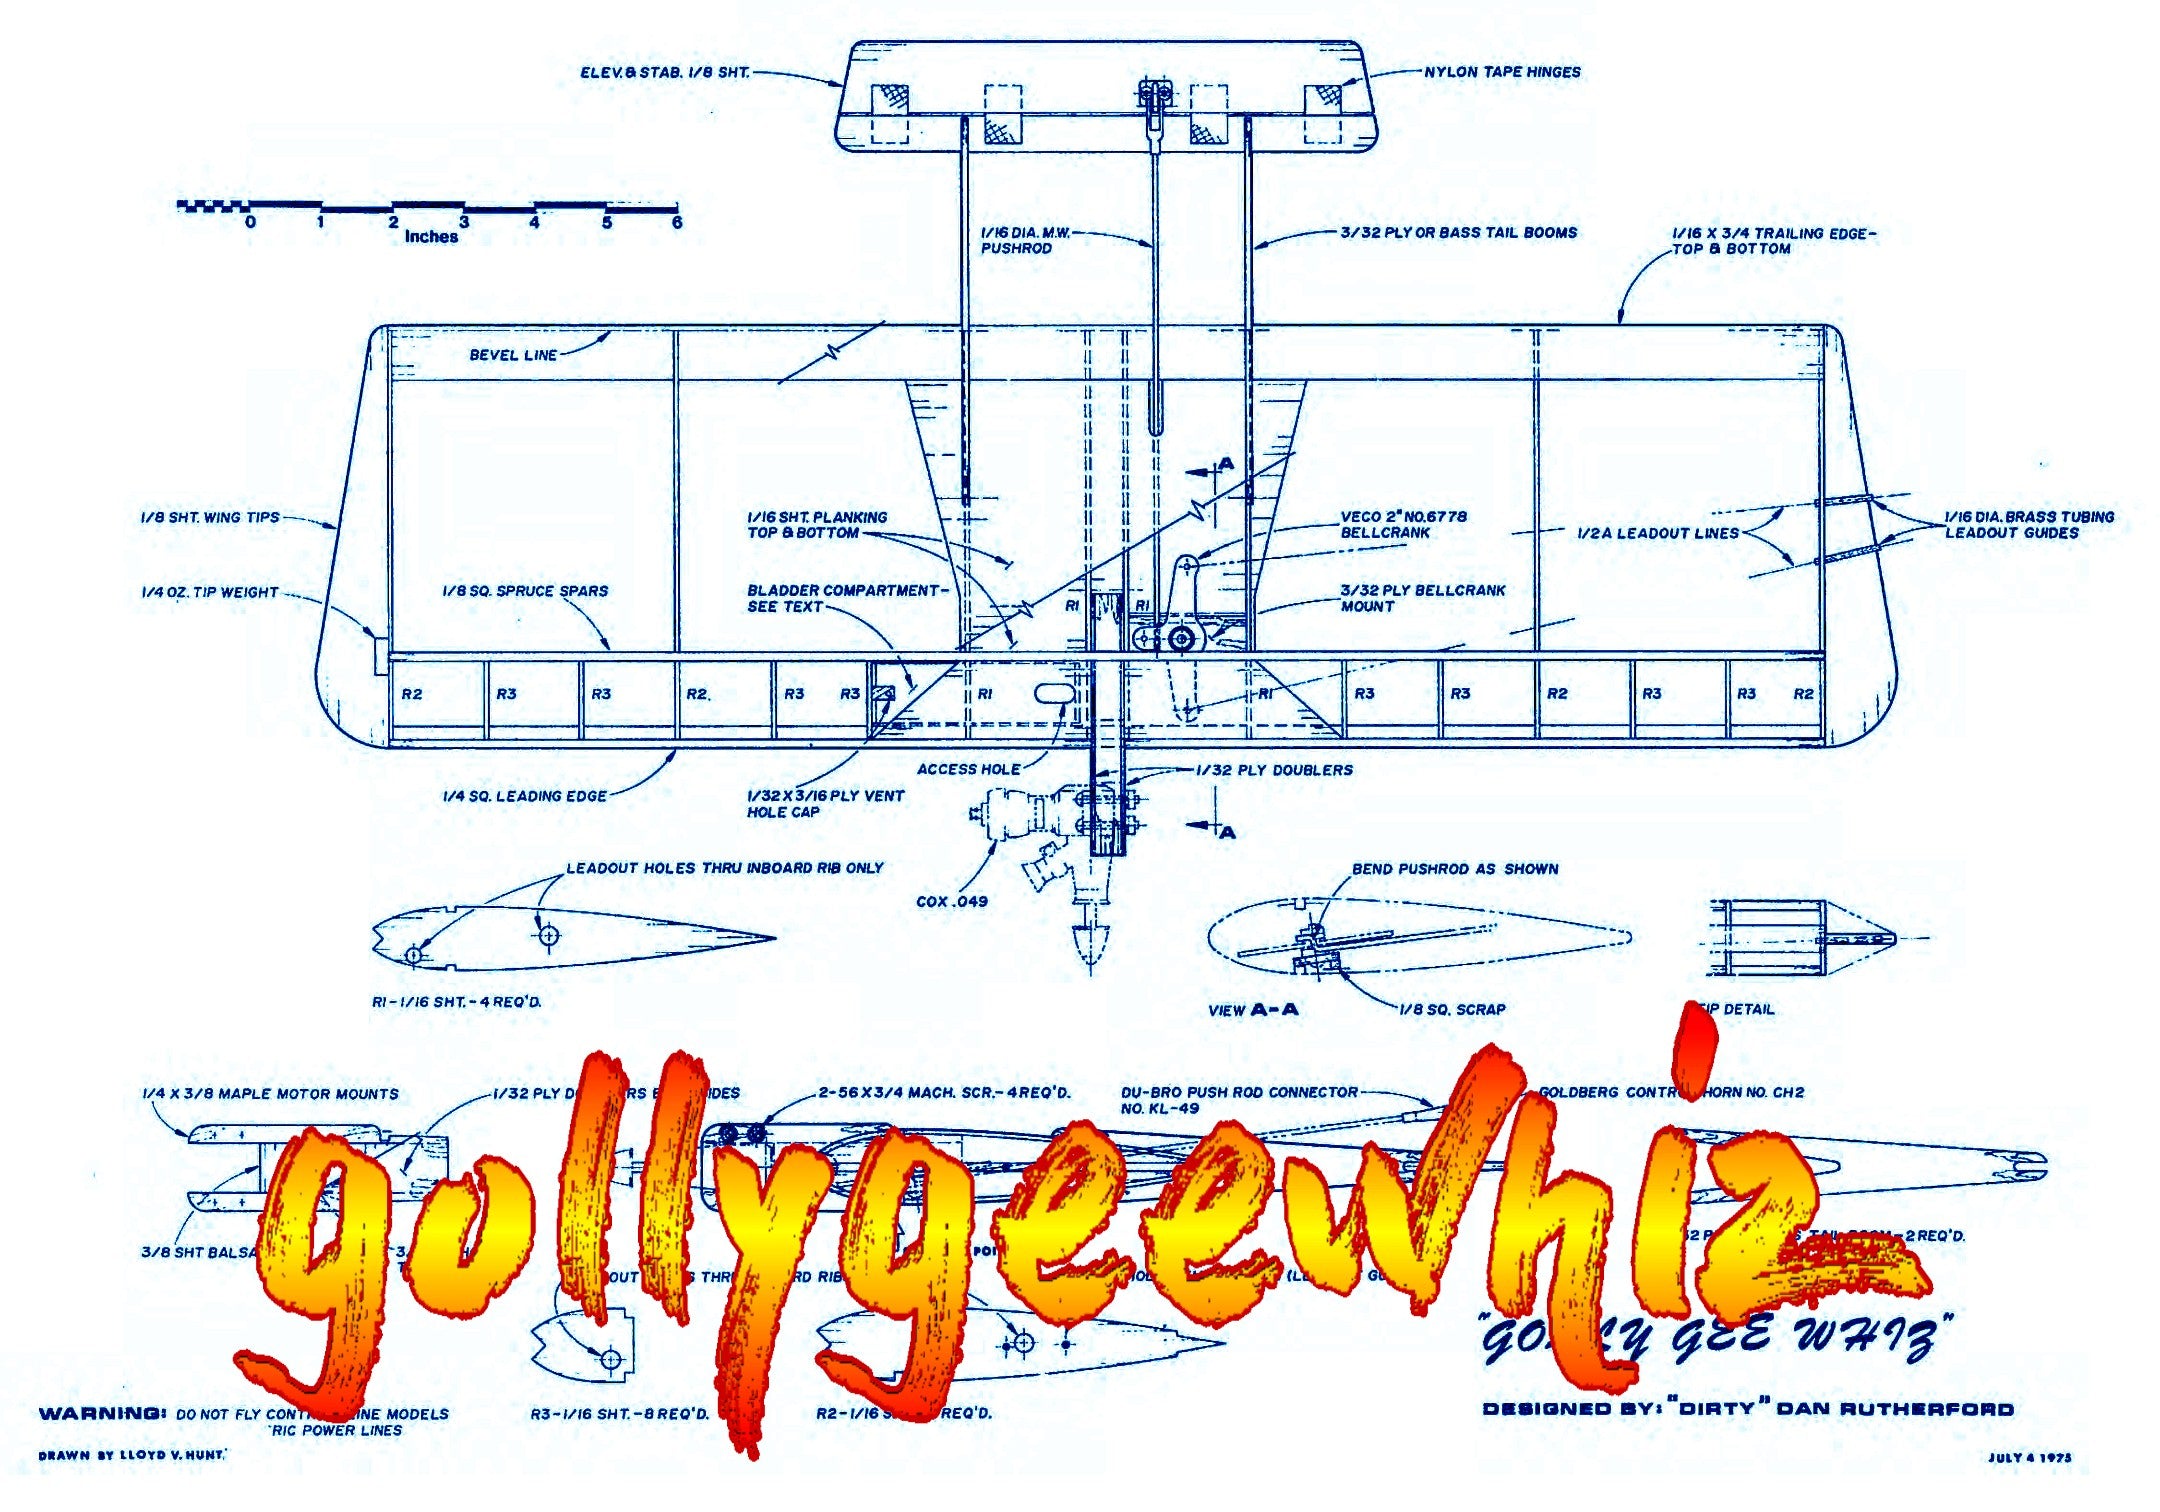 full size printed plan & building notes  half‑a combat *gollygeewhiz* engine .049  wingspan 22